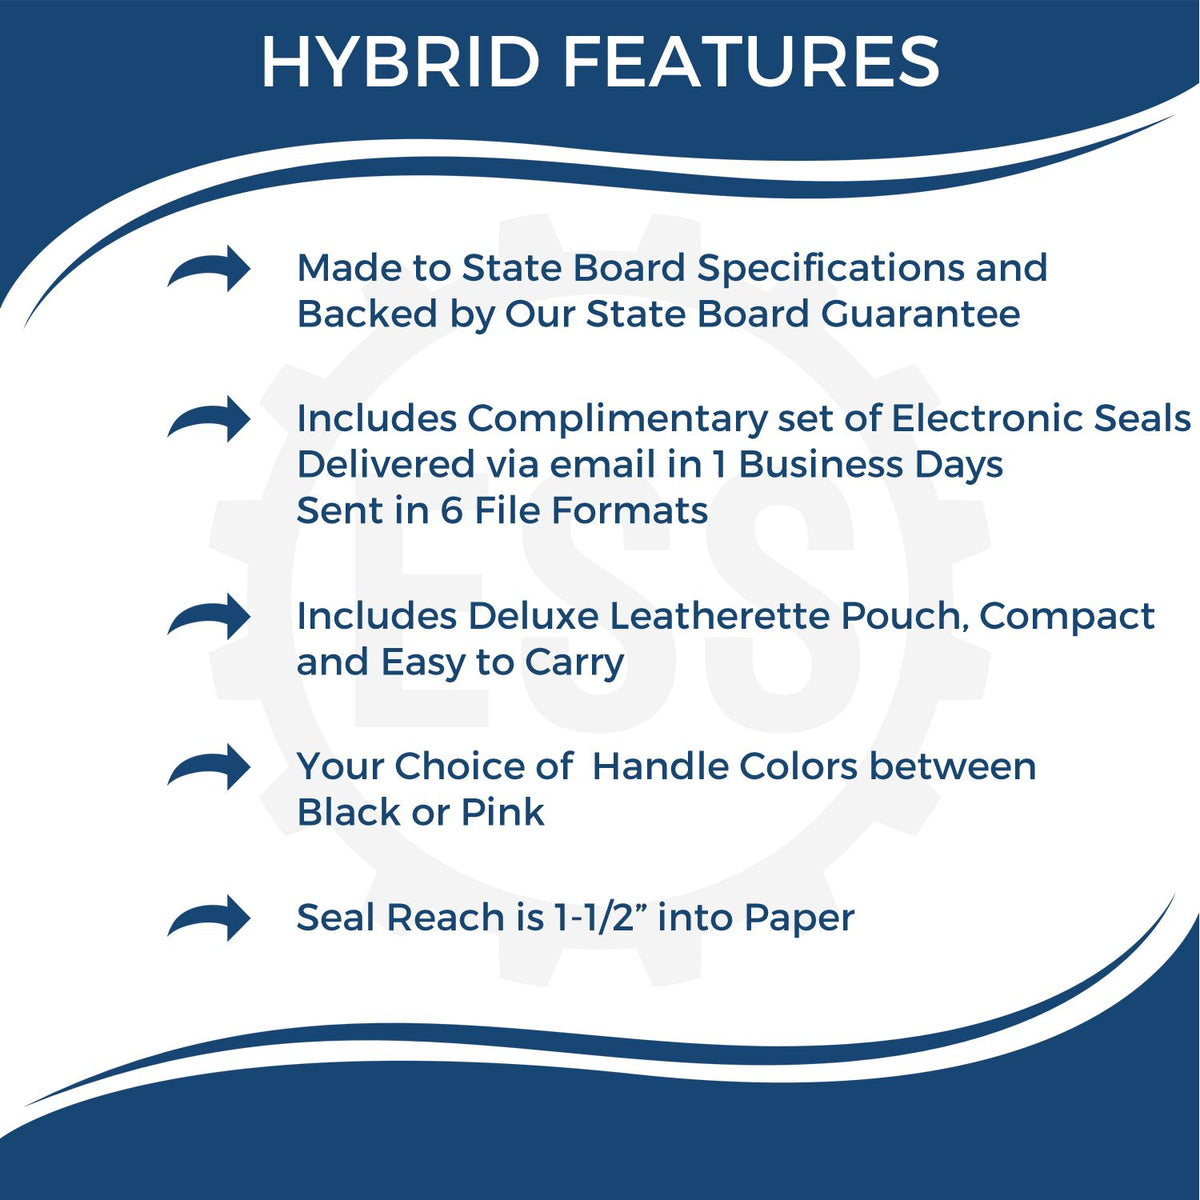 A picture of an infographic highlighting the selling points for the Hybrid Kentucky Engineer Seal